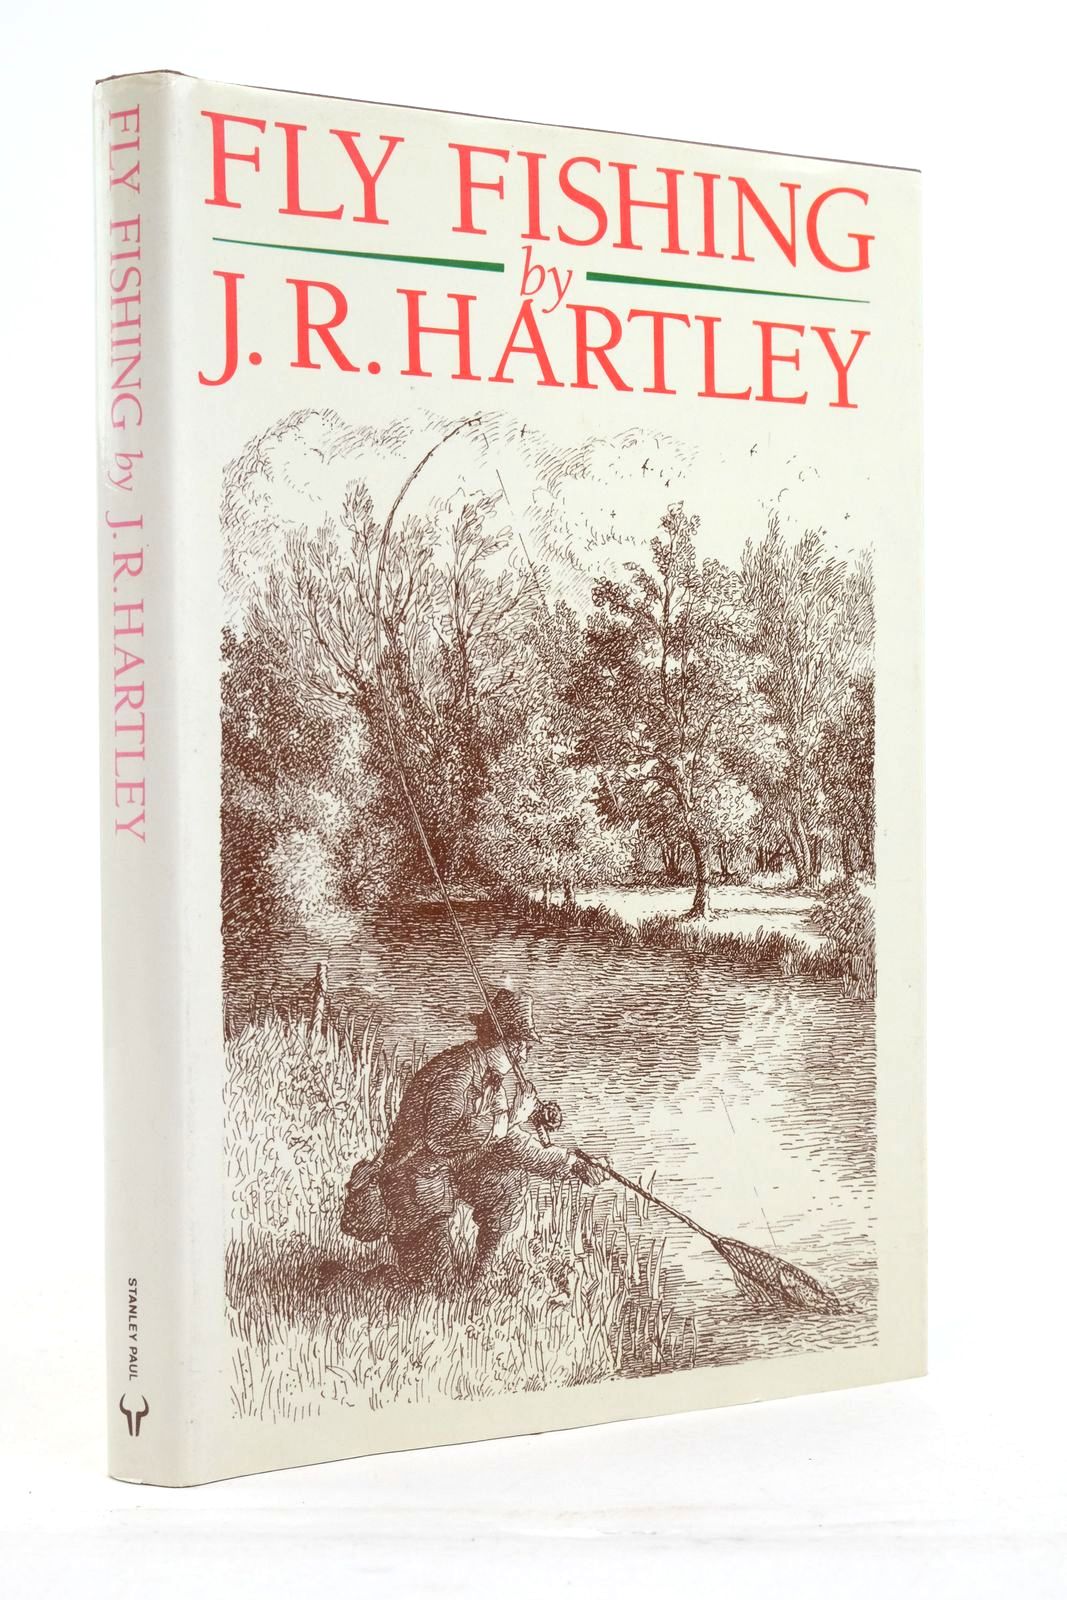 Photo of FLY FISHING written by Hartley, J.R. illustrated by Benson, Patrick published by Stanley Paul (STOCK CODE: 2137785)  for sale by Stella & Rose's Books